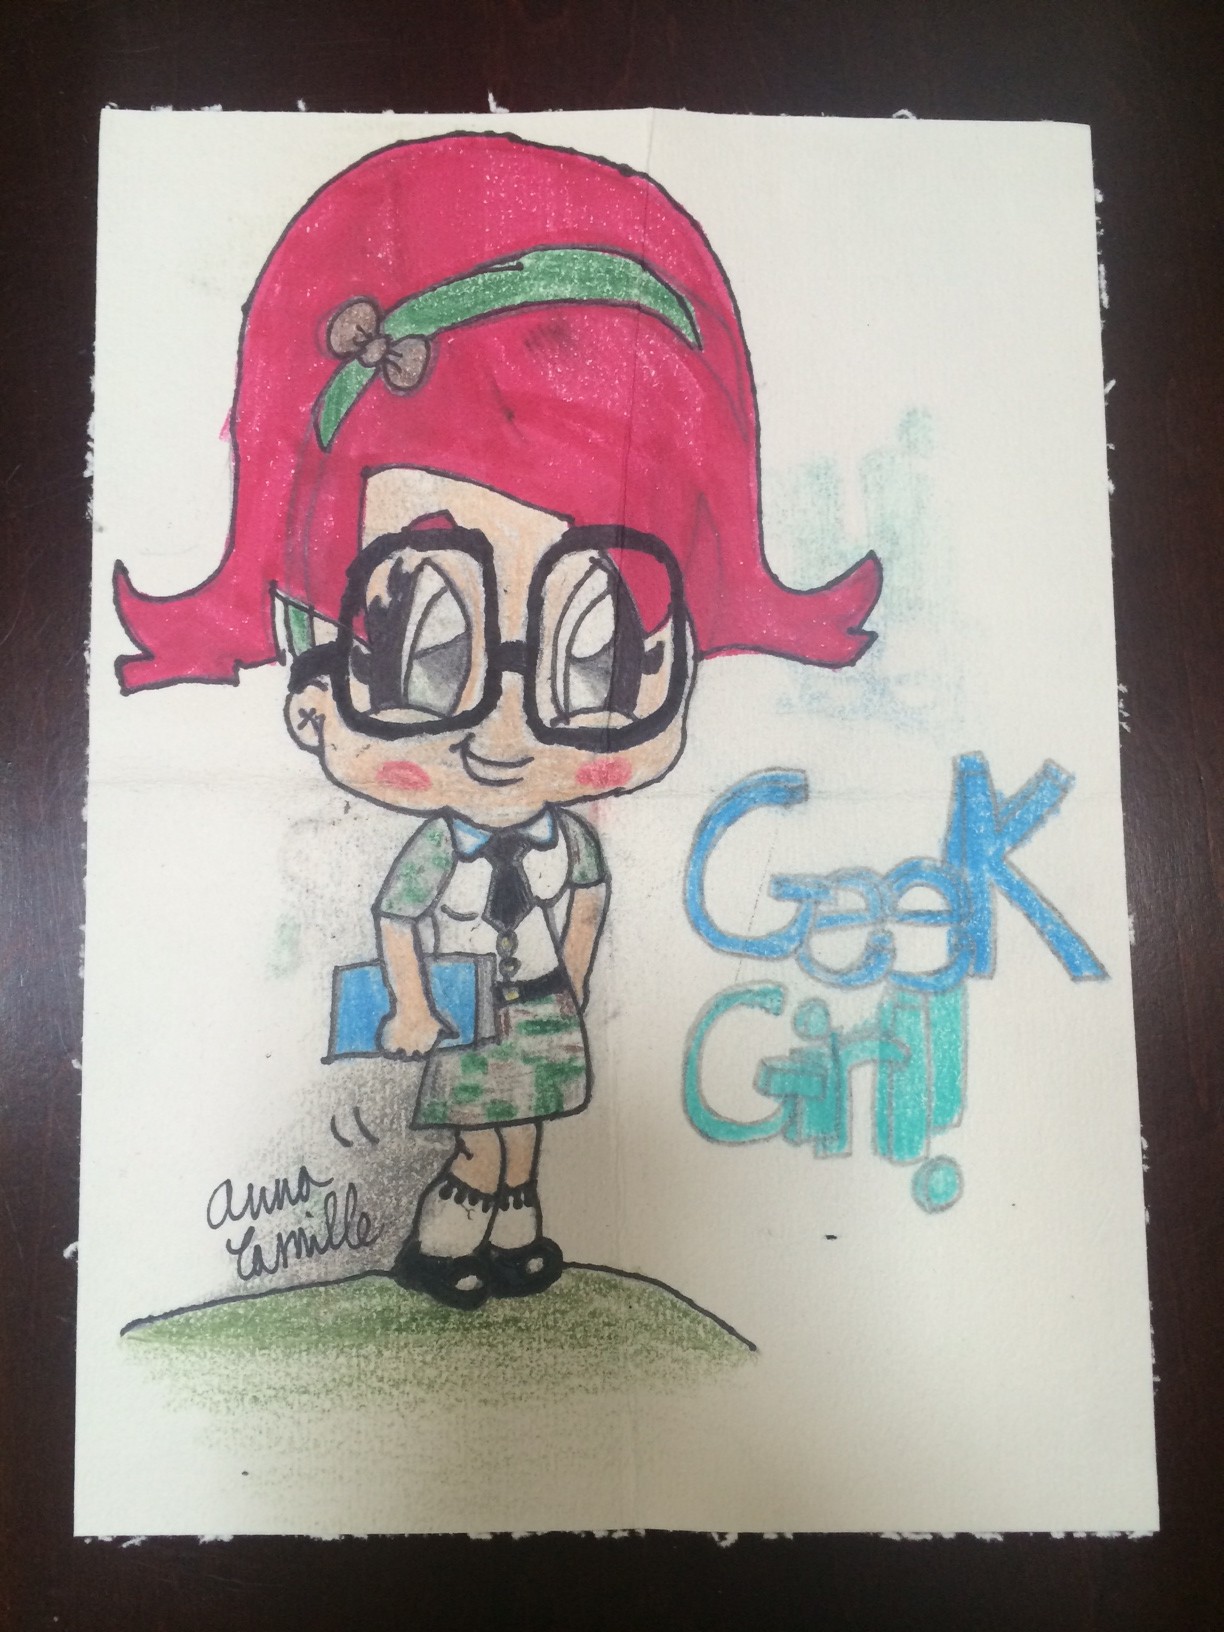 Anna Camille drew me this Geek Girl! I love it!